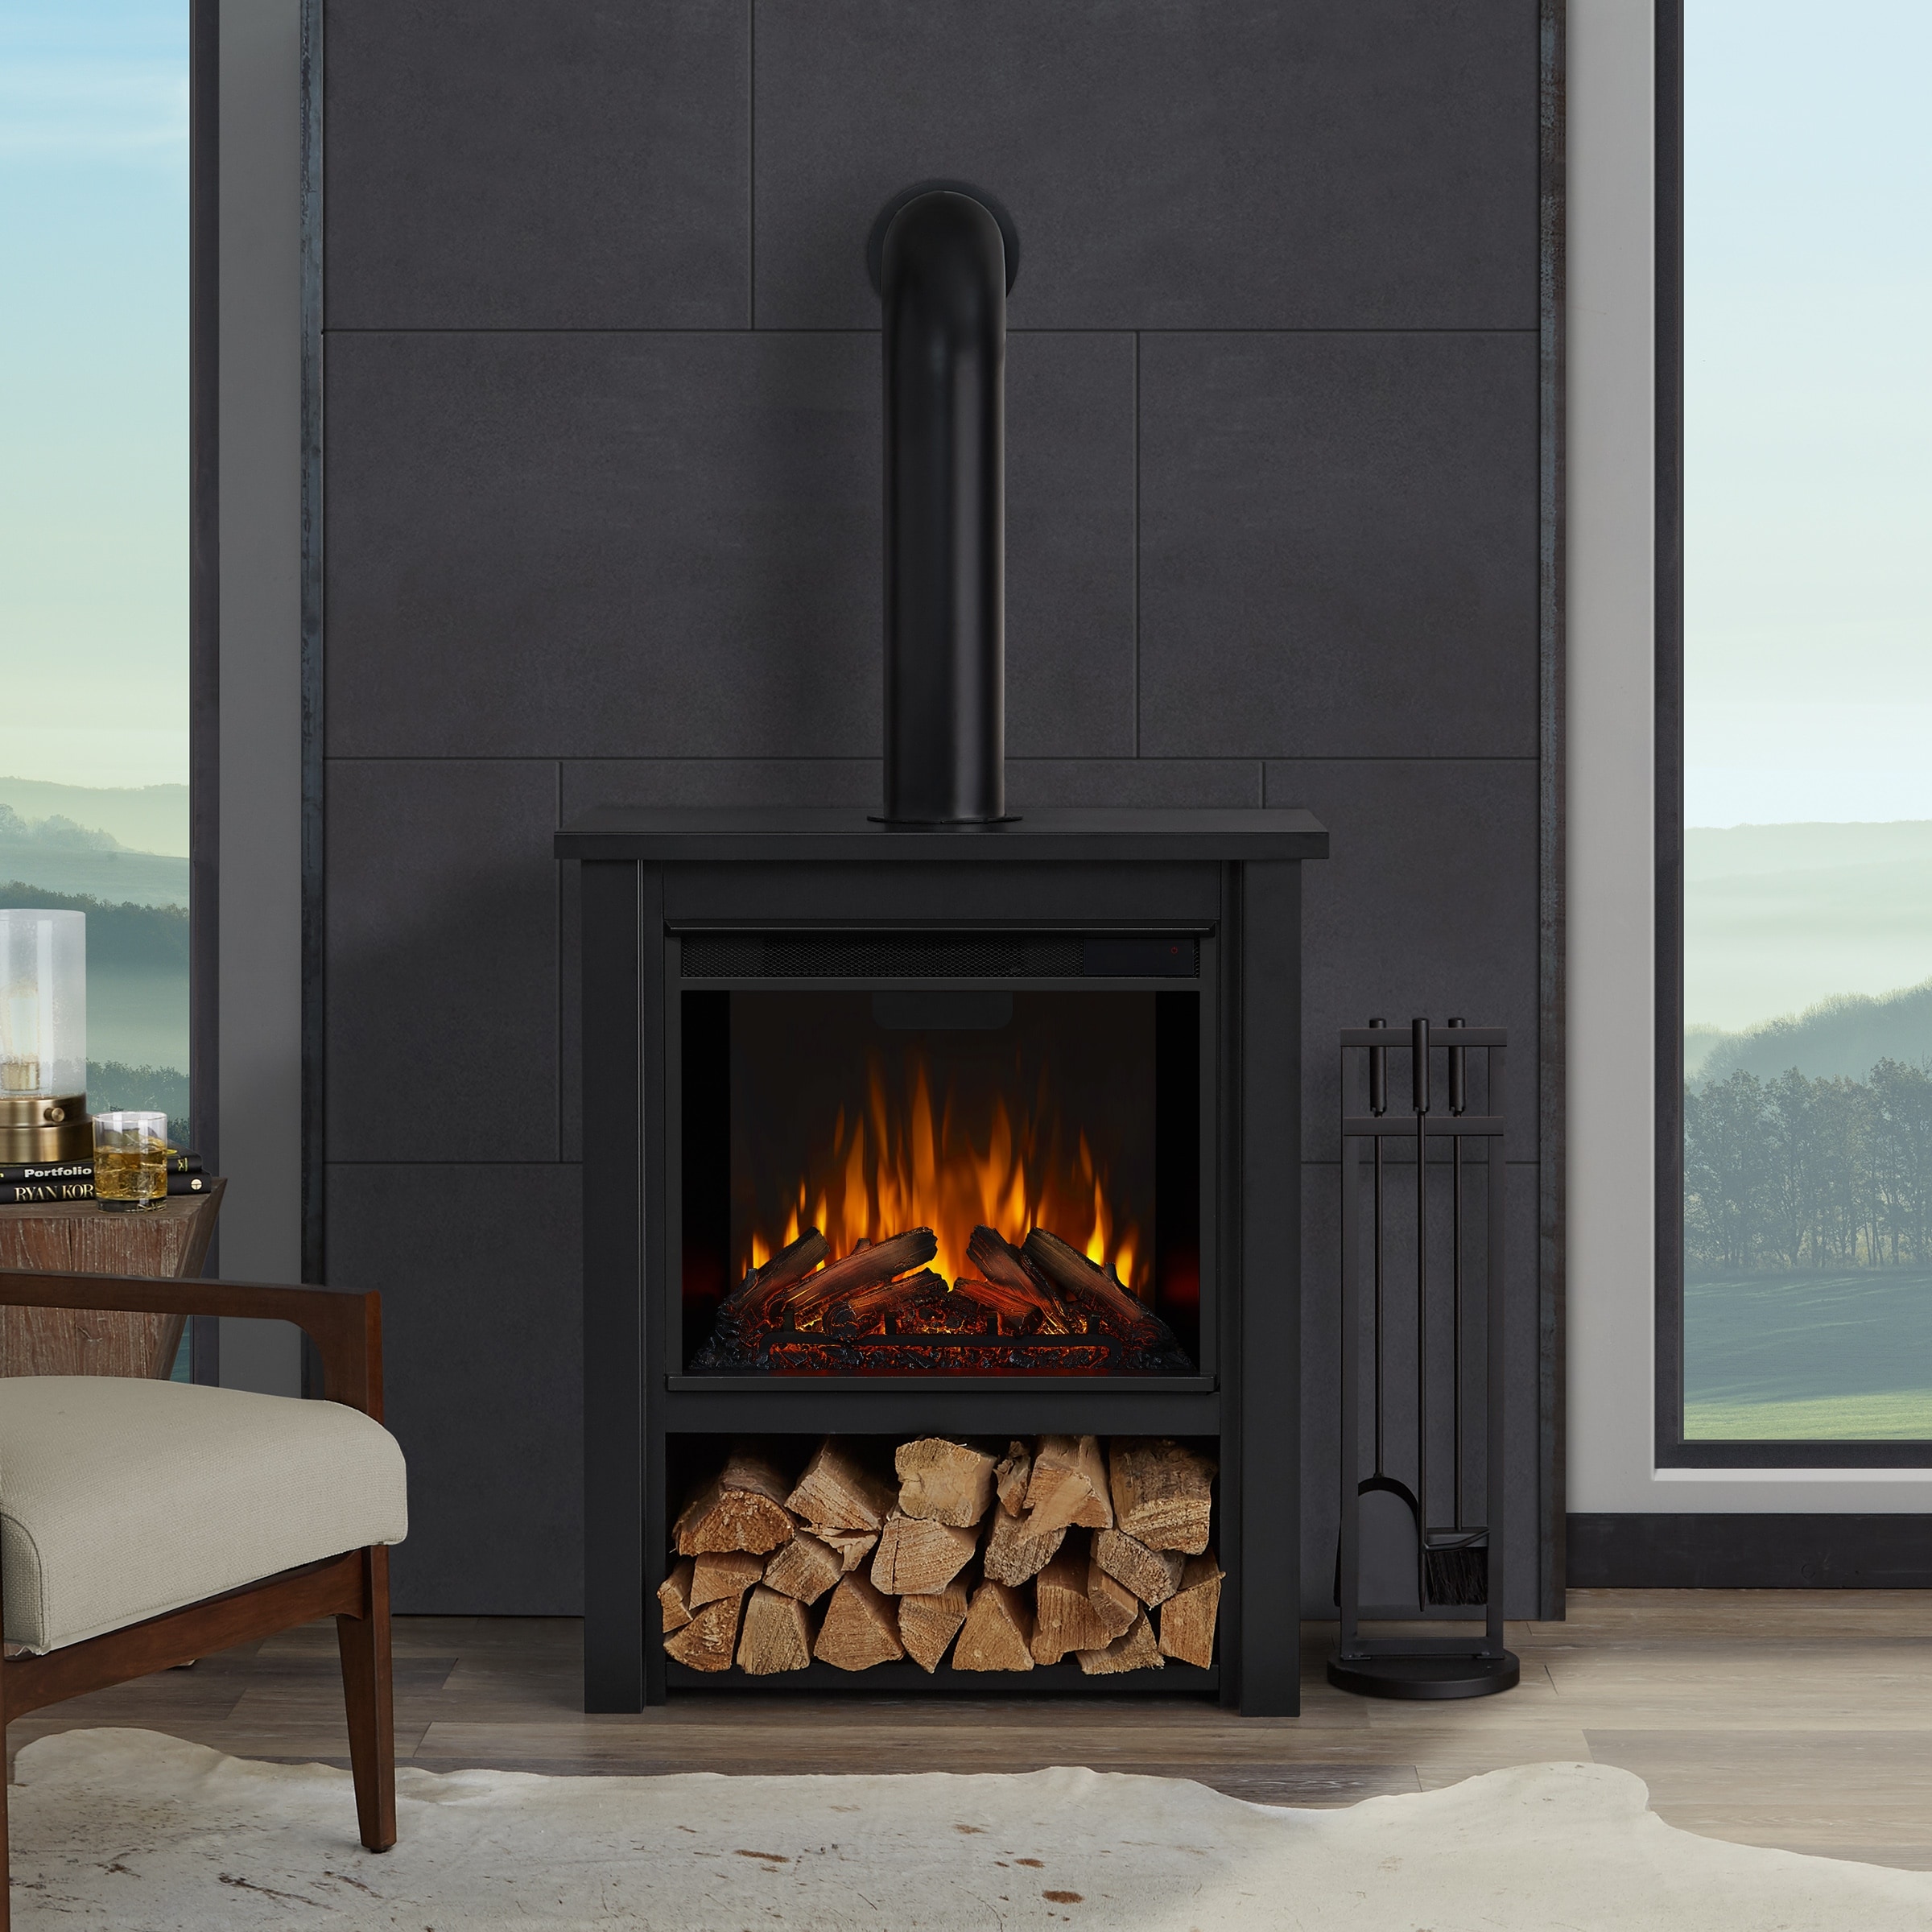 Hollis 32" Rustic Black Electric Fireplace by Real Flame Bed Bath   Beyond 18104891